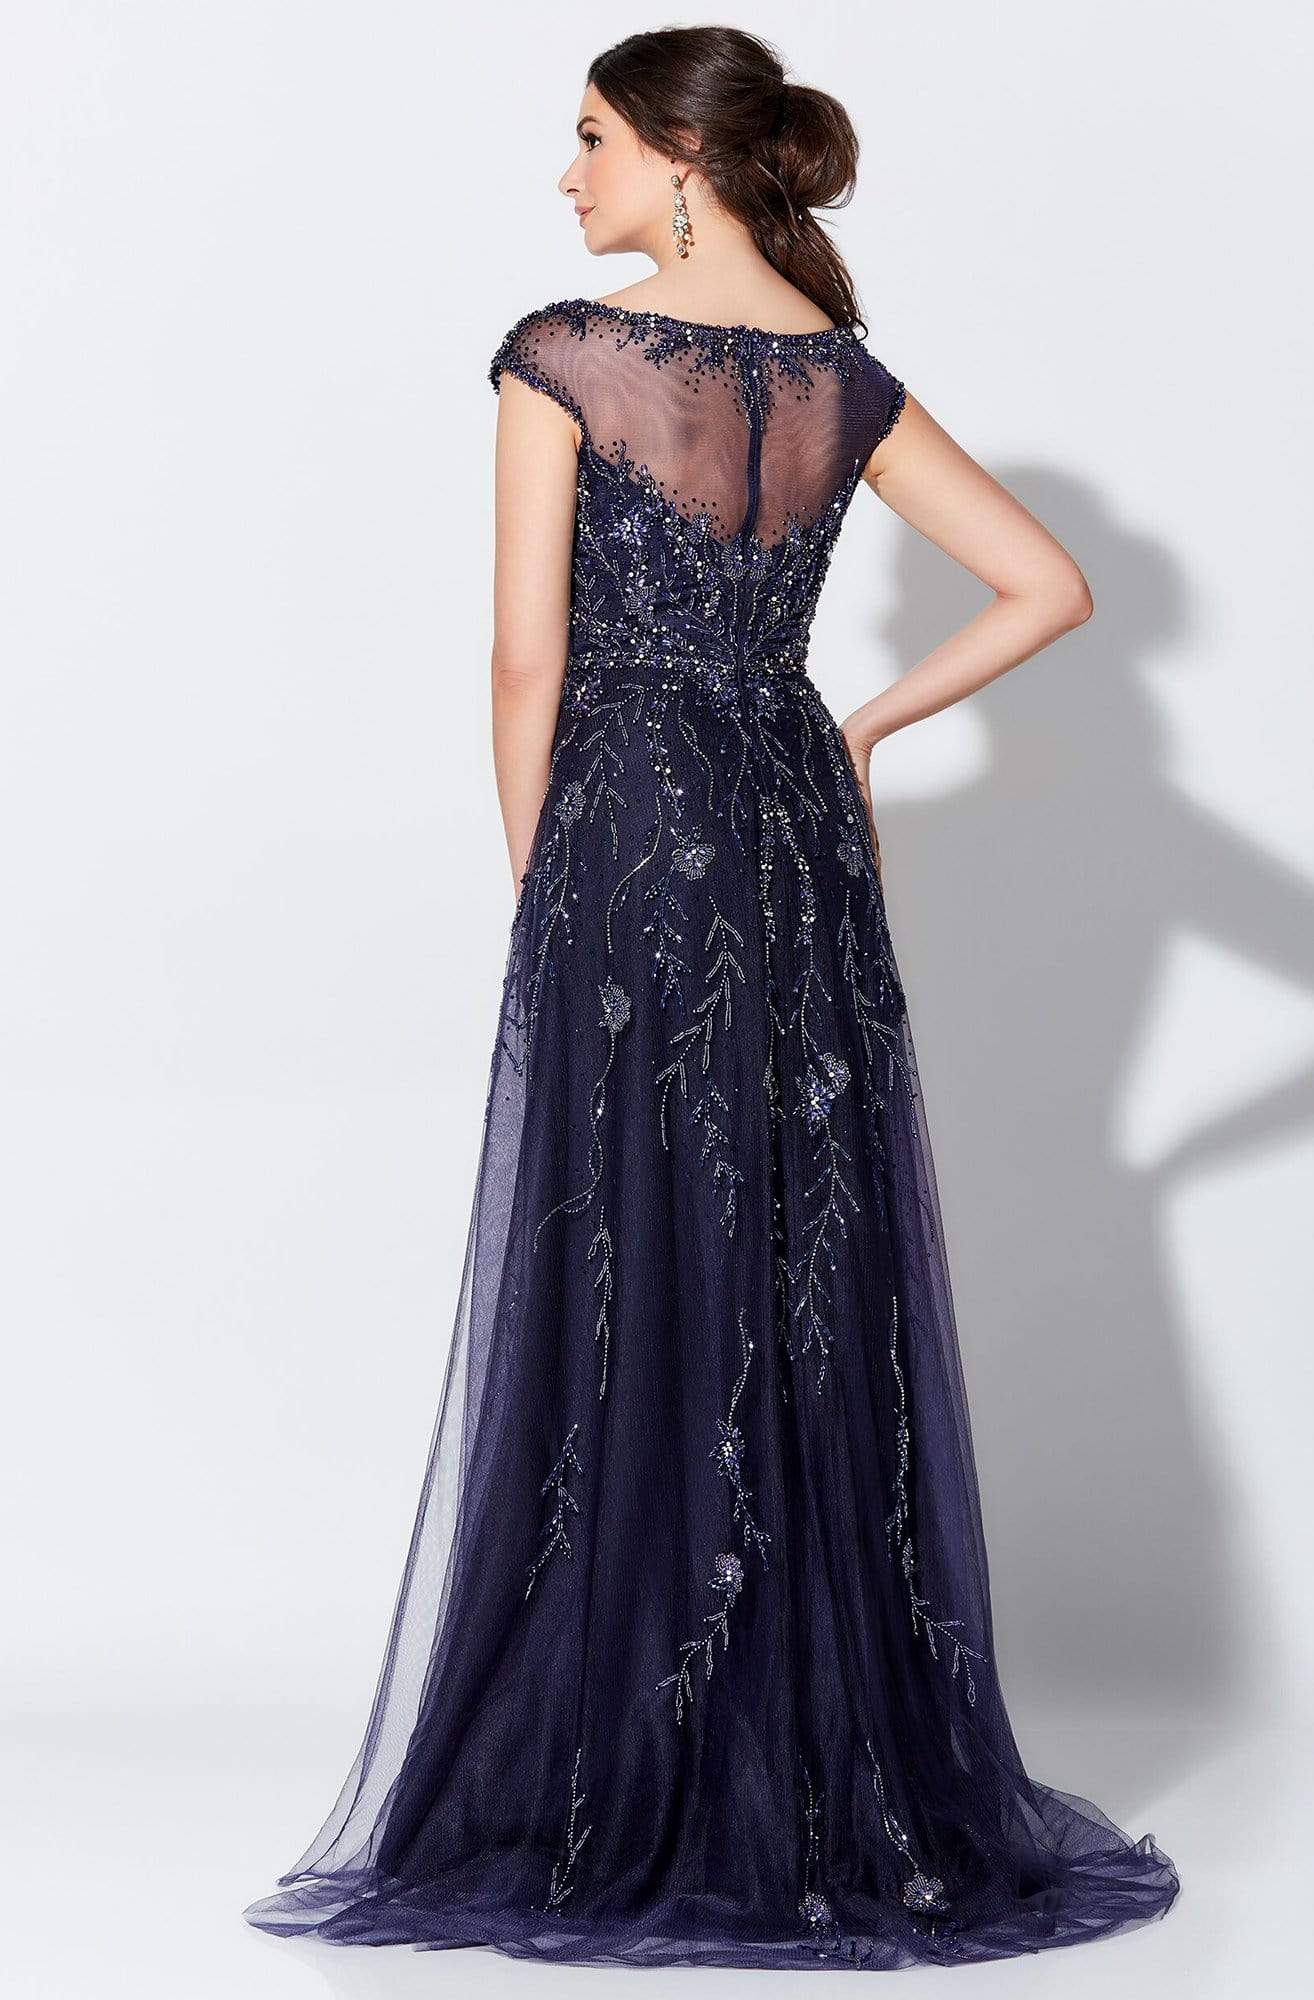 Ivonne D by Mon Cheri - 119D48 Stunning Beaded Tulle A-line Gown In Black and Blue